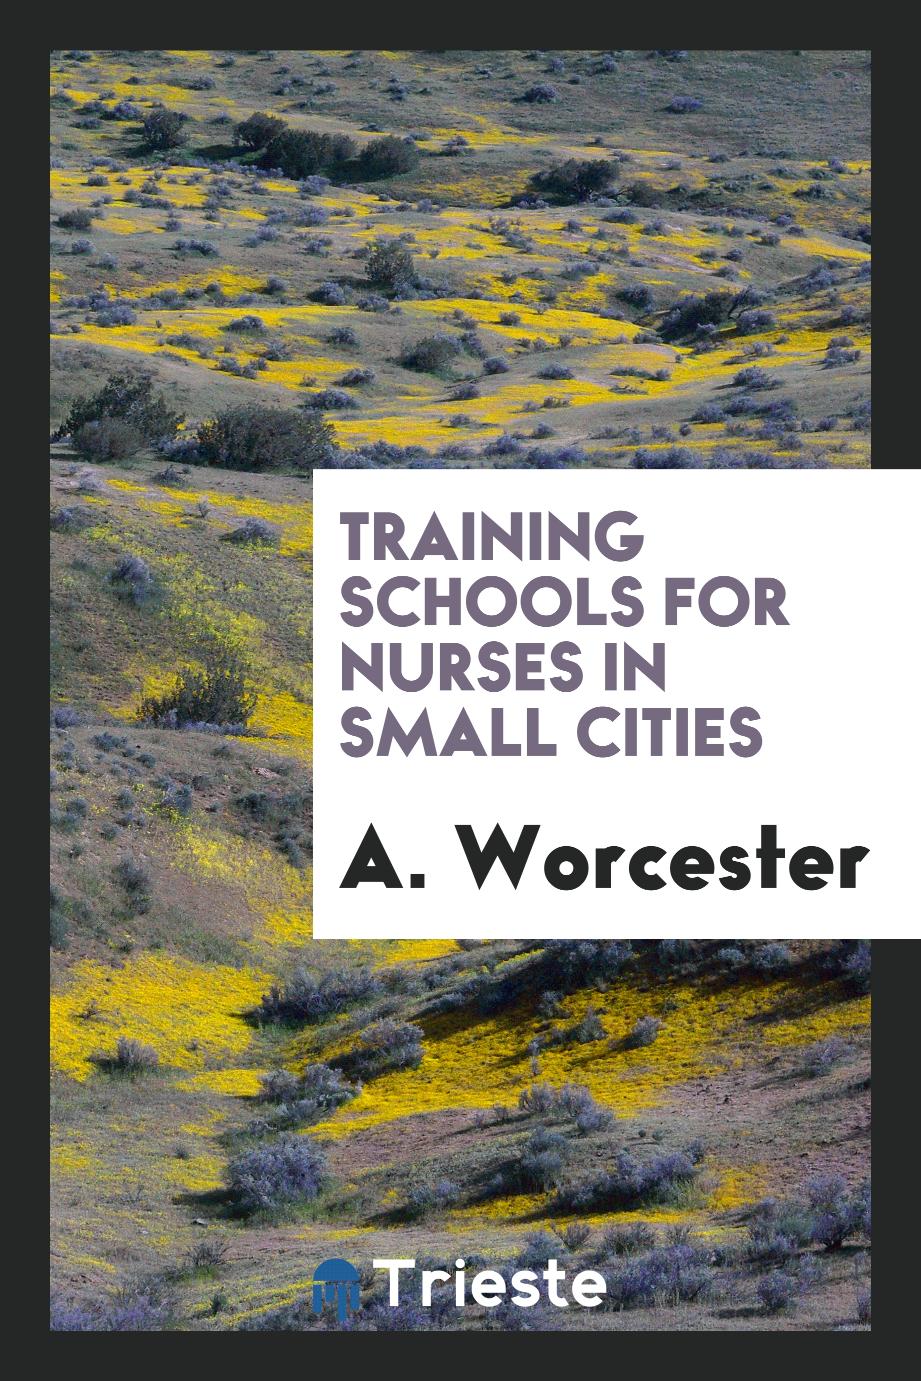 Training schools for nurses in small cities